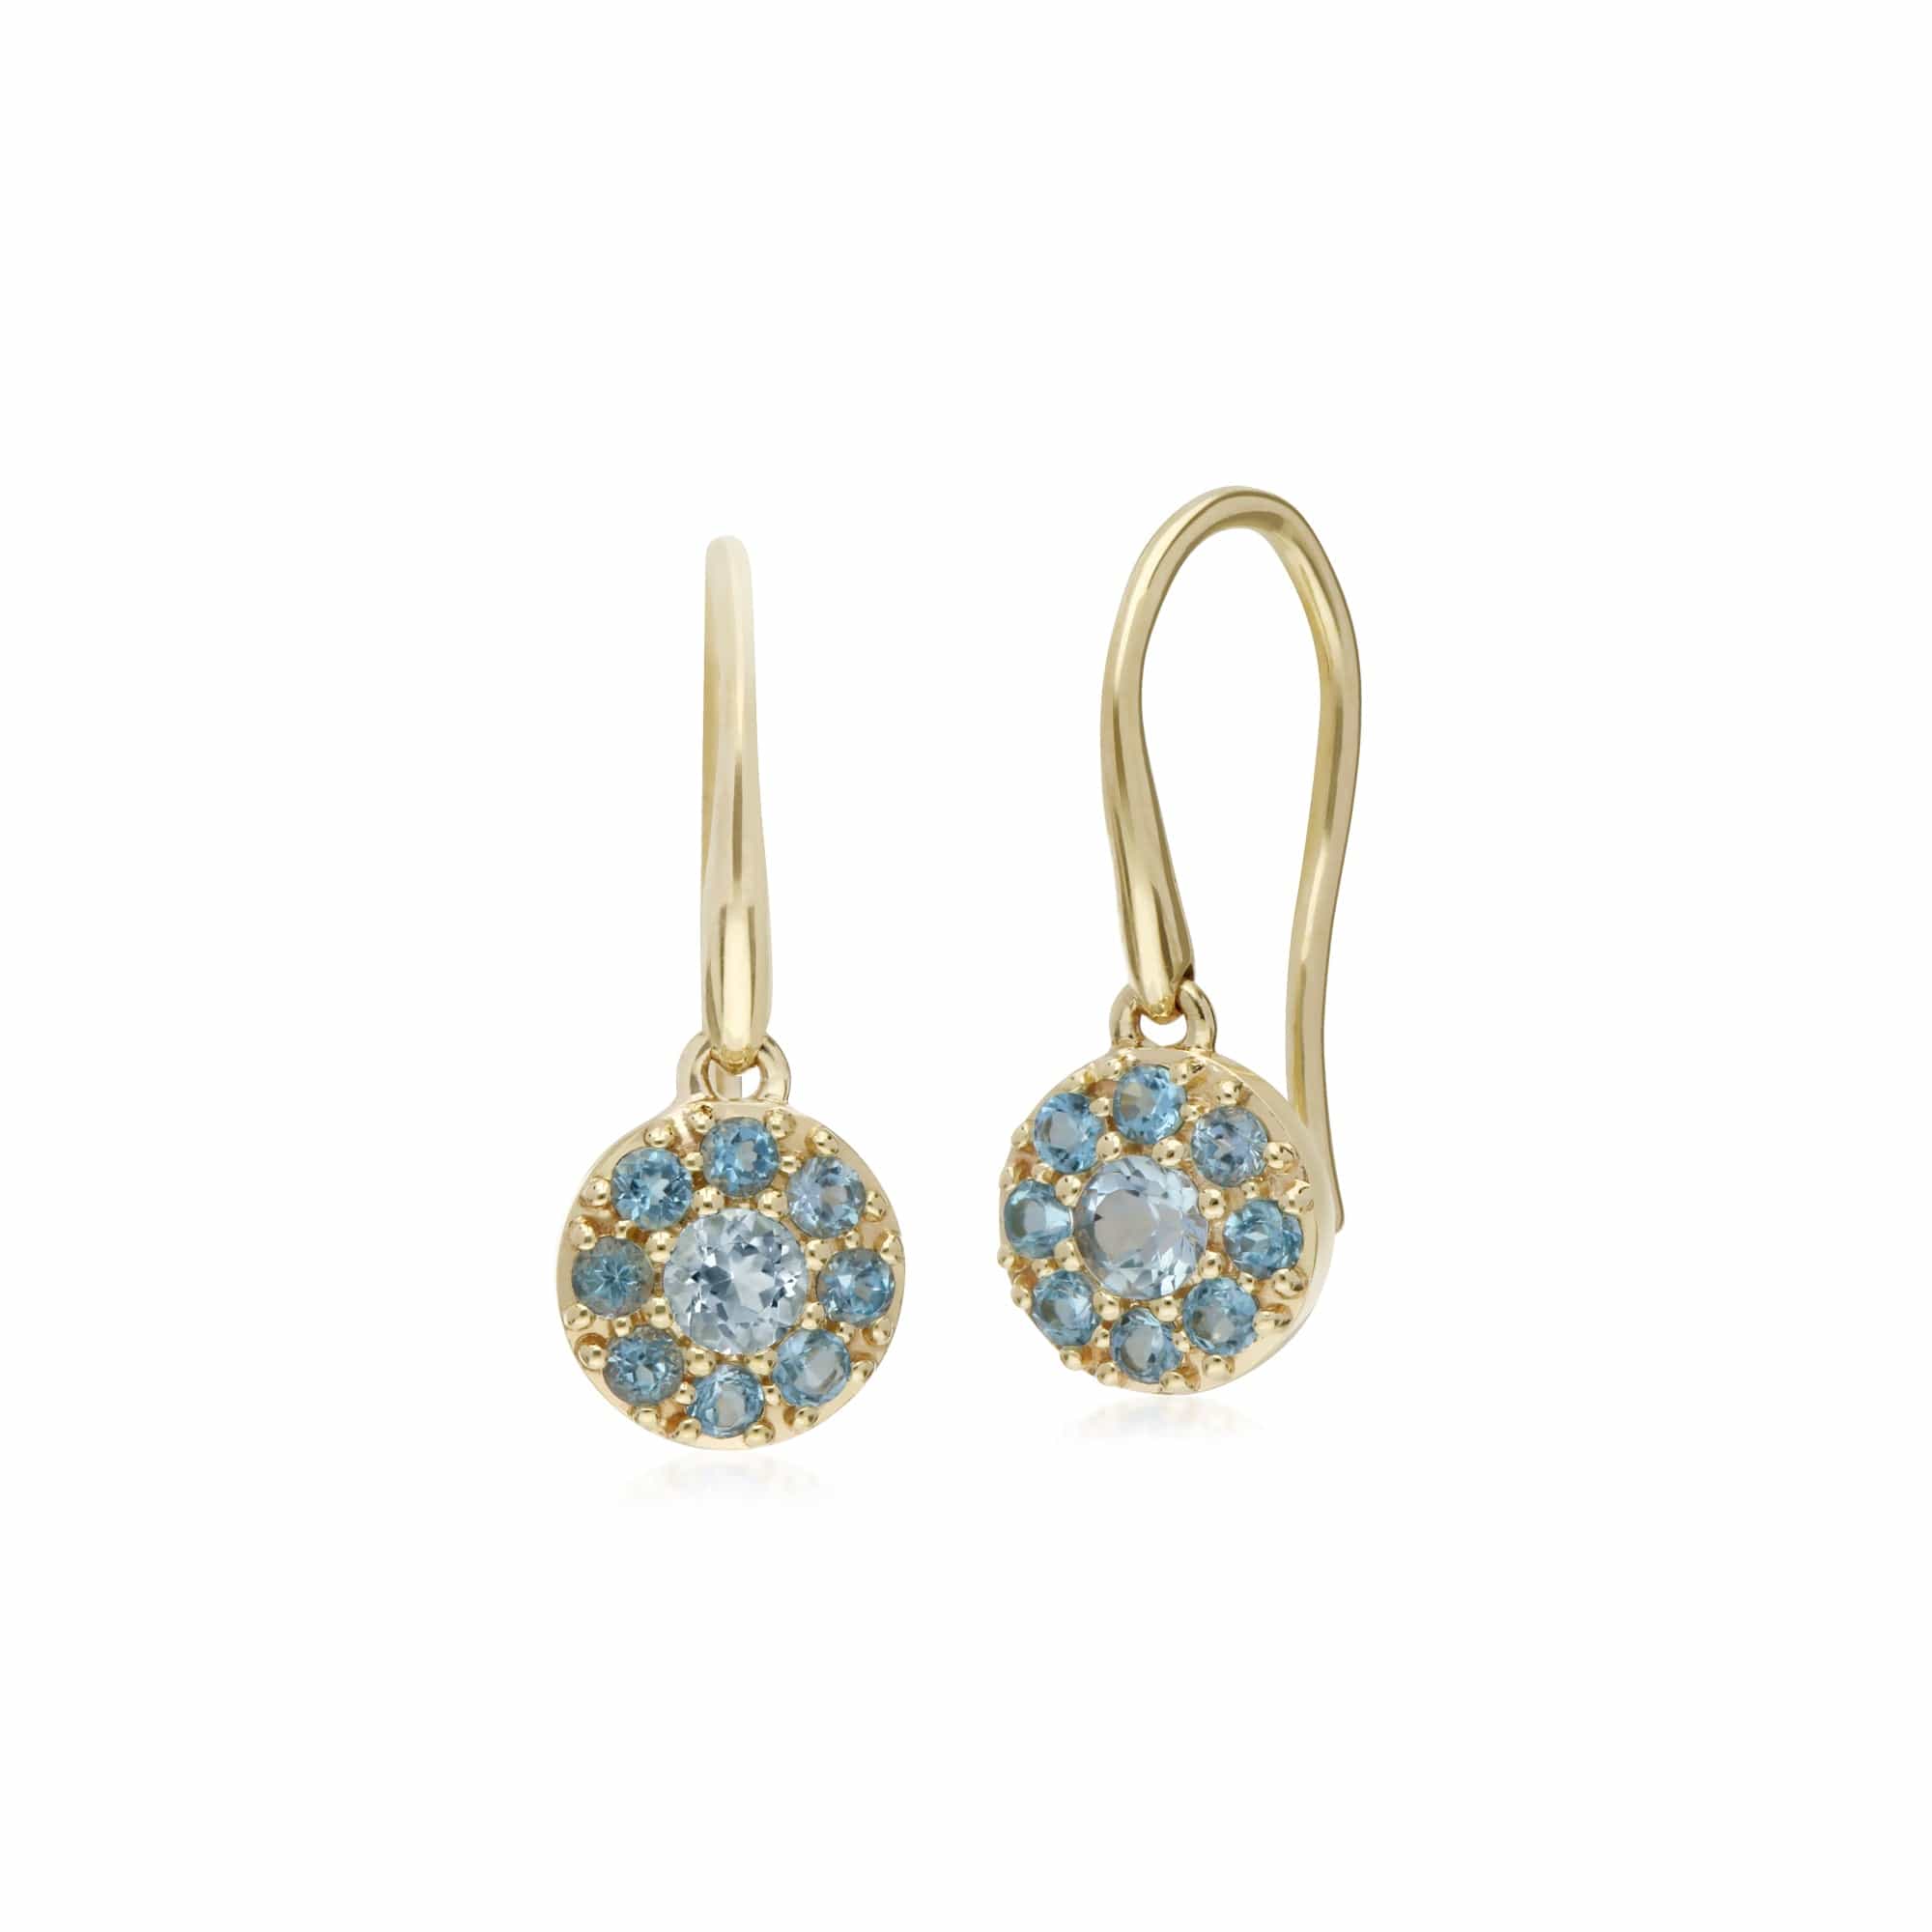 Cluster Round Blue Topaz Circle Fish Hook Drop Earrings in 9ct Yellow Gold - Gemondo